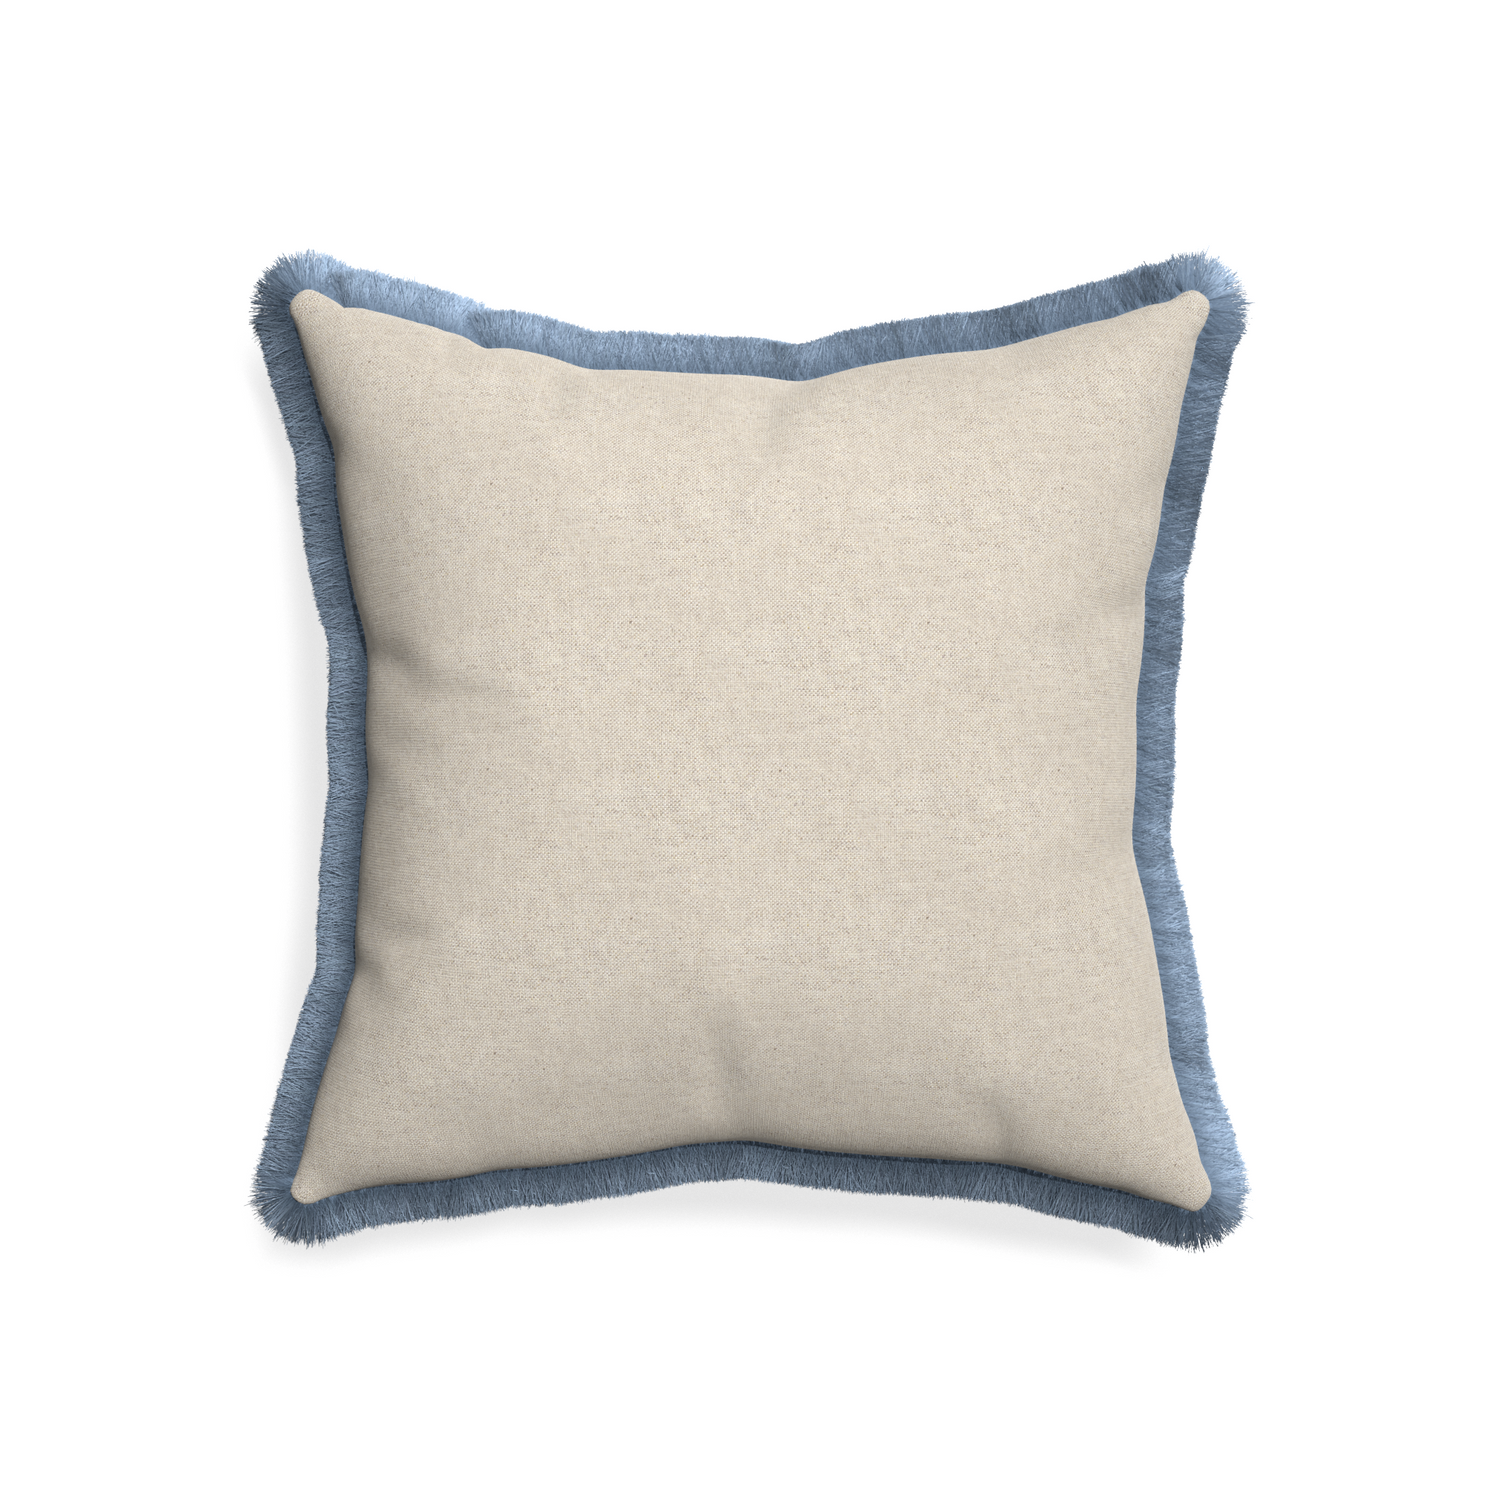 20-square oat custom light brownpillow with sky fringe on white background